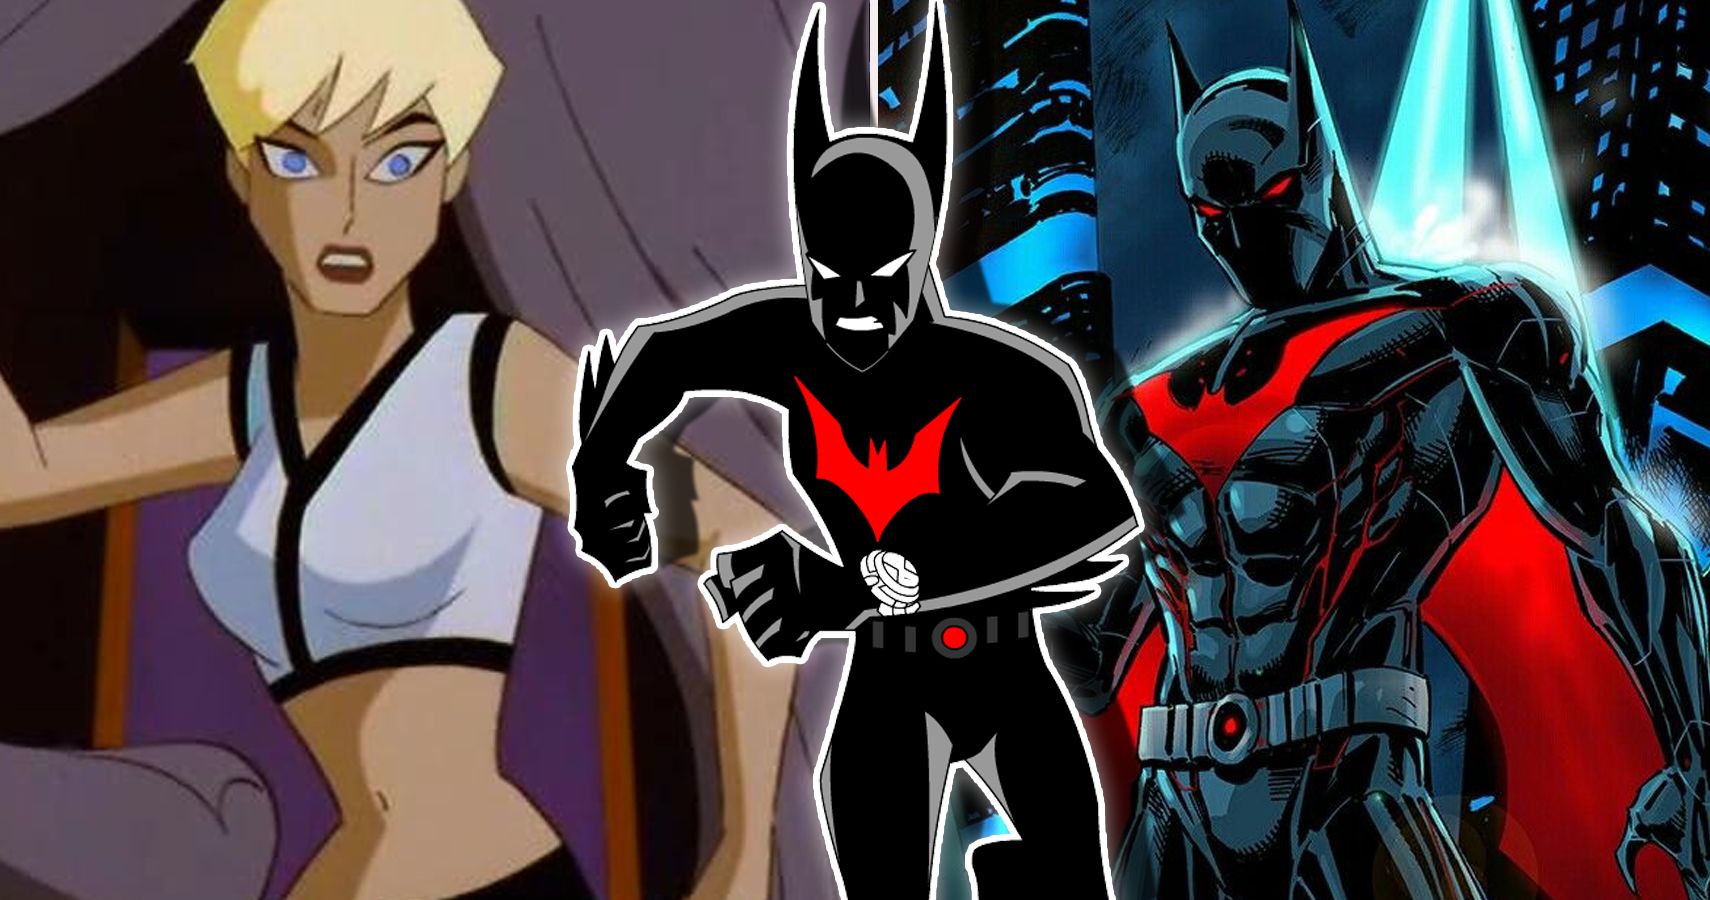 25 Awesome Things Only True Fans Know About Batman Beyond